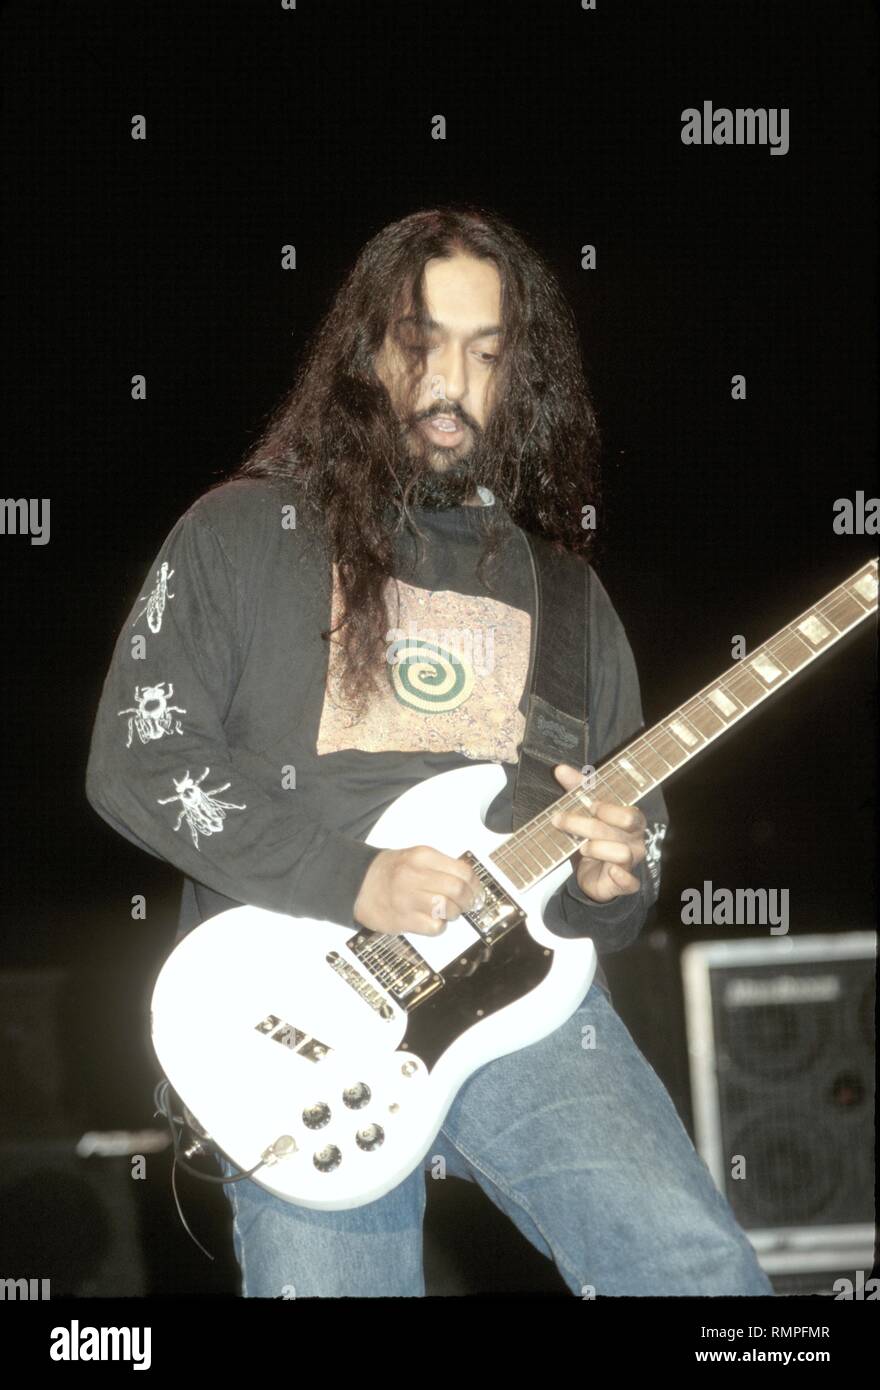 Guitarist Kim Thayil of the rock band Soundgarden is shown performing on stage during a 'live' concert appearance. Stock Photo